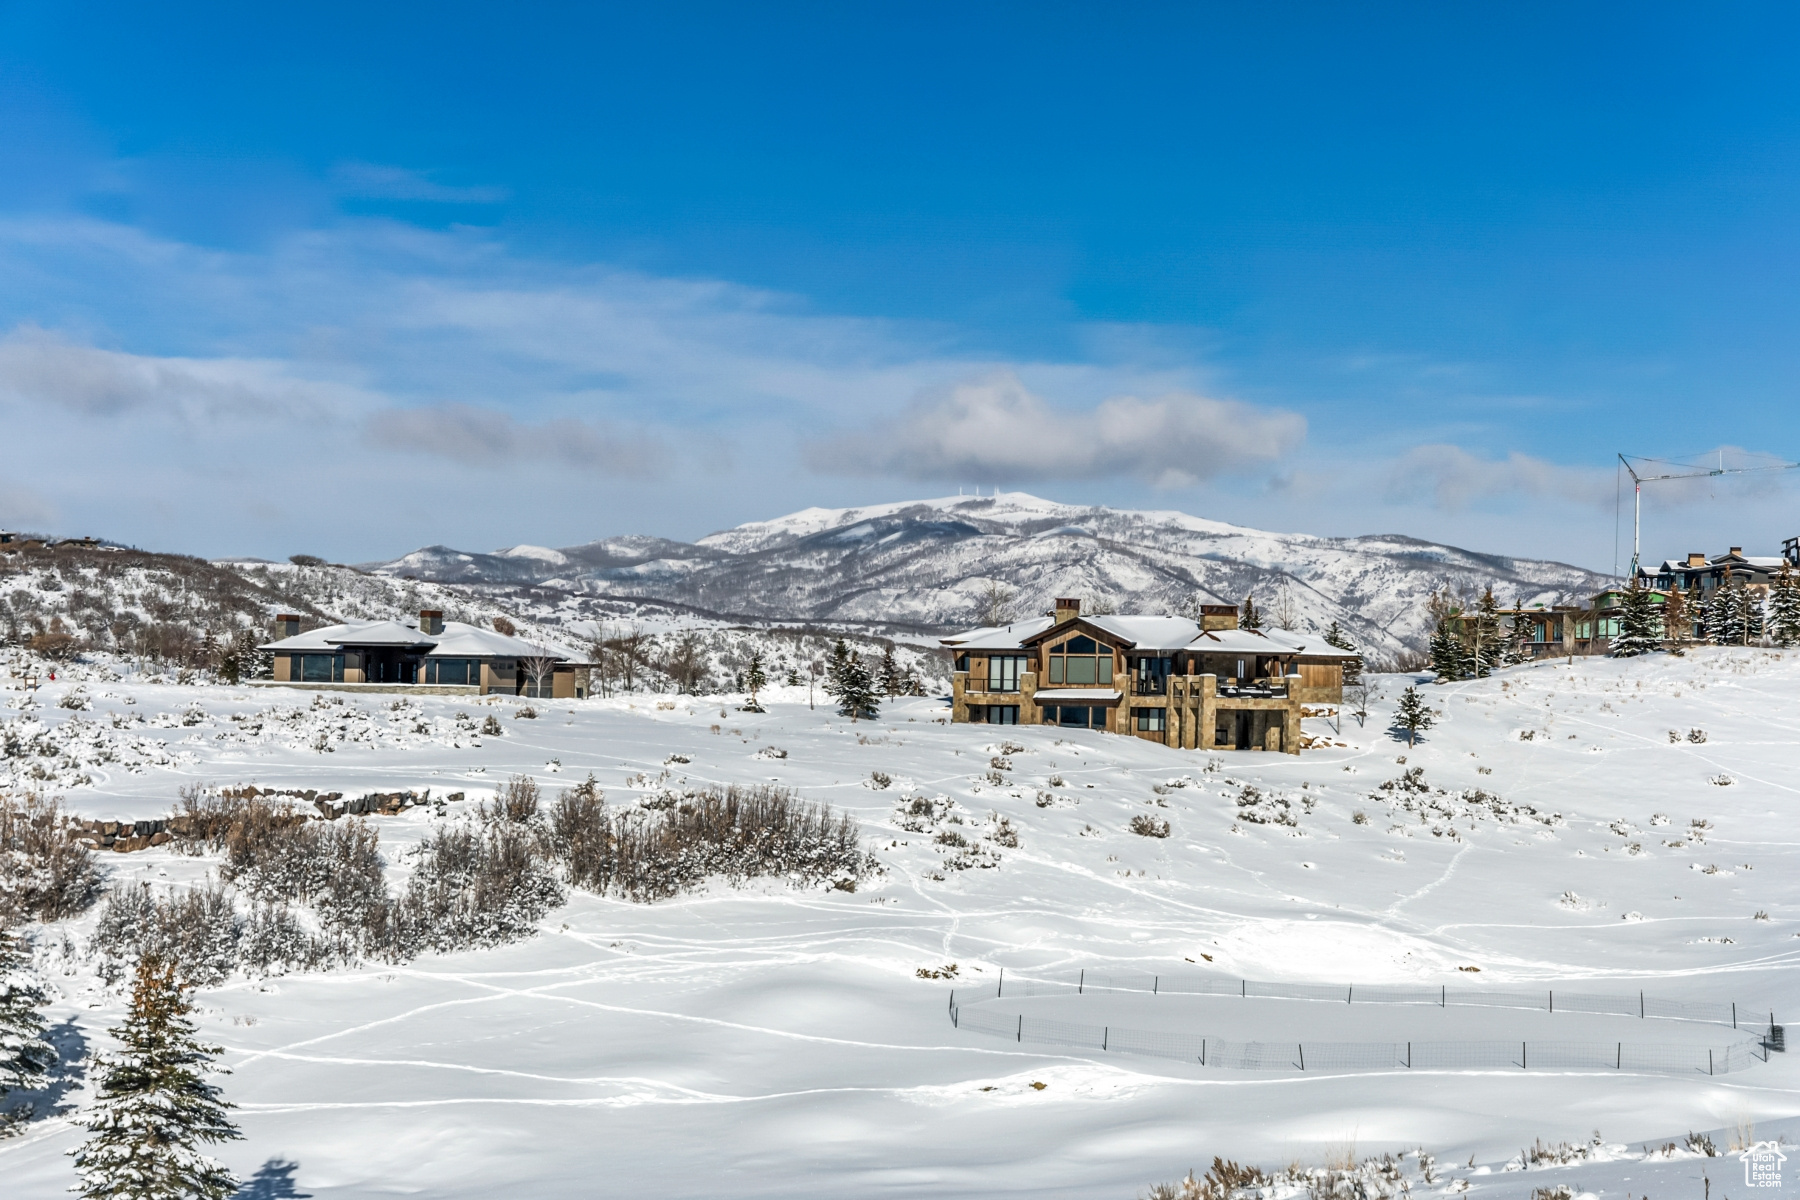 3228 WAPITI CANYON #54, Park City, Utah 84098, 4 Bedrooms Bedrooms, 18 Rooms Rooms,1 BathroomBathrooms,Residential,For sale,WAPITI CANYON,1991512